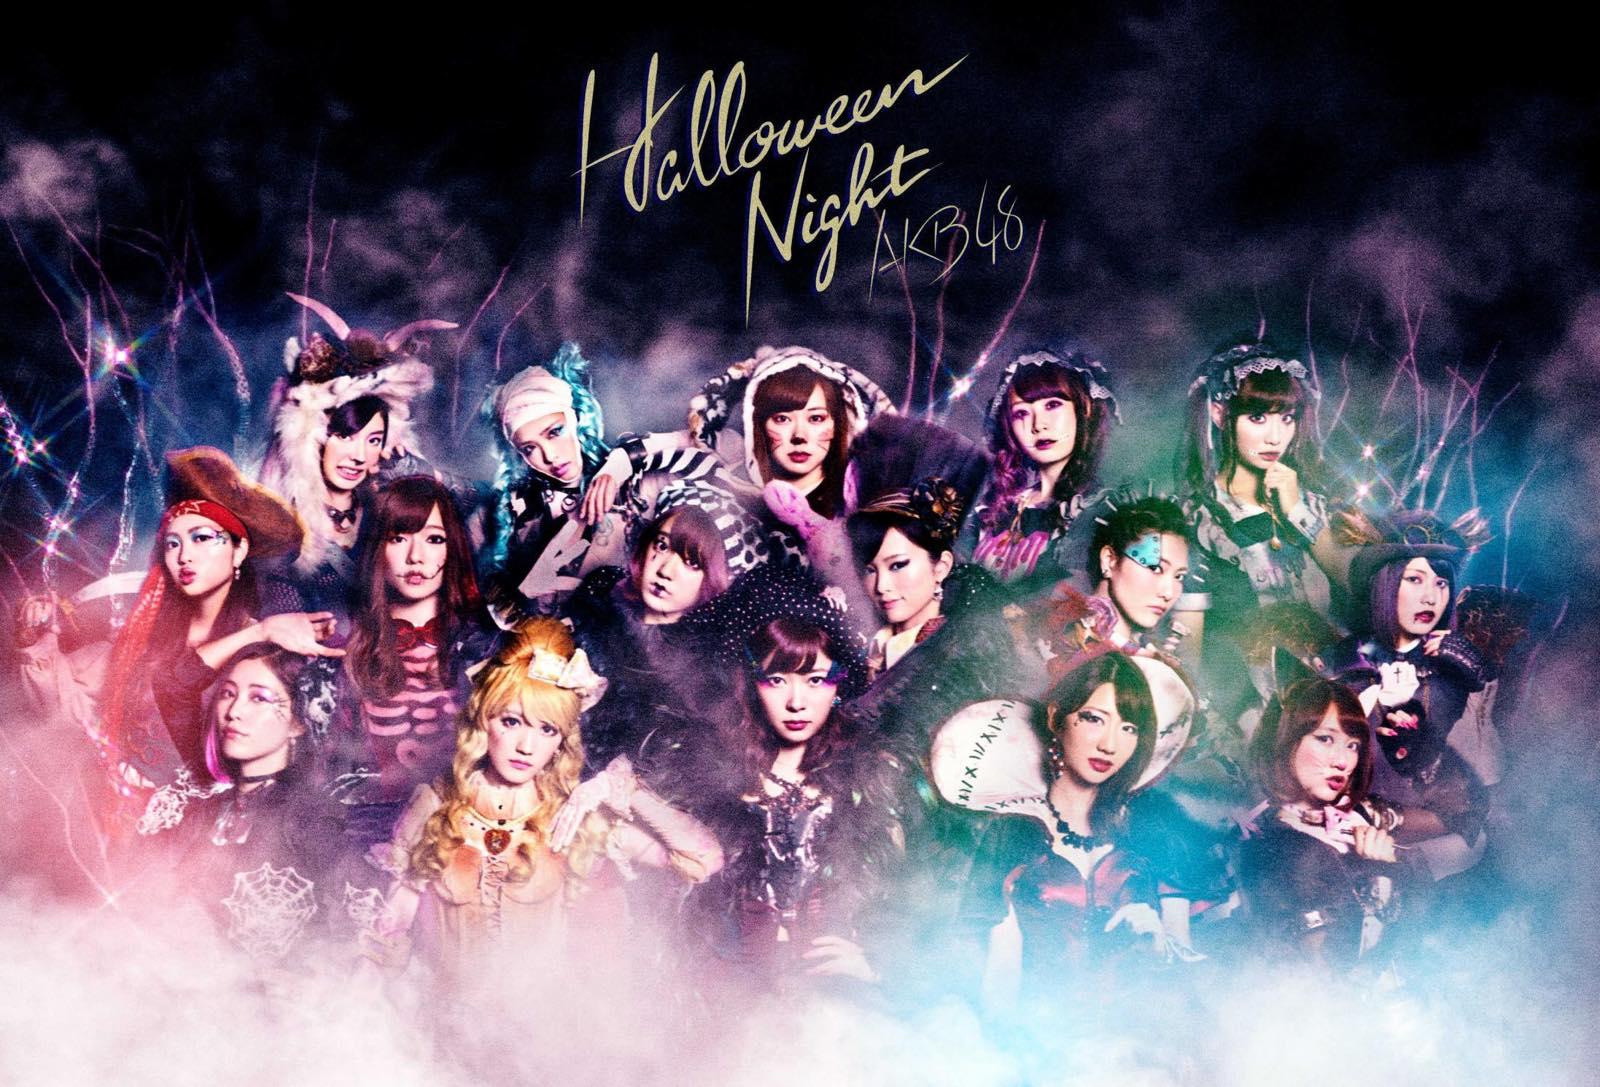 Can You Dig it? It’s a Boo-gie Wonderland in AKB48 ‘s MV for “Halloween Night”!